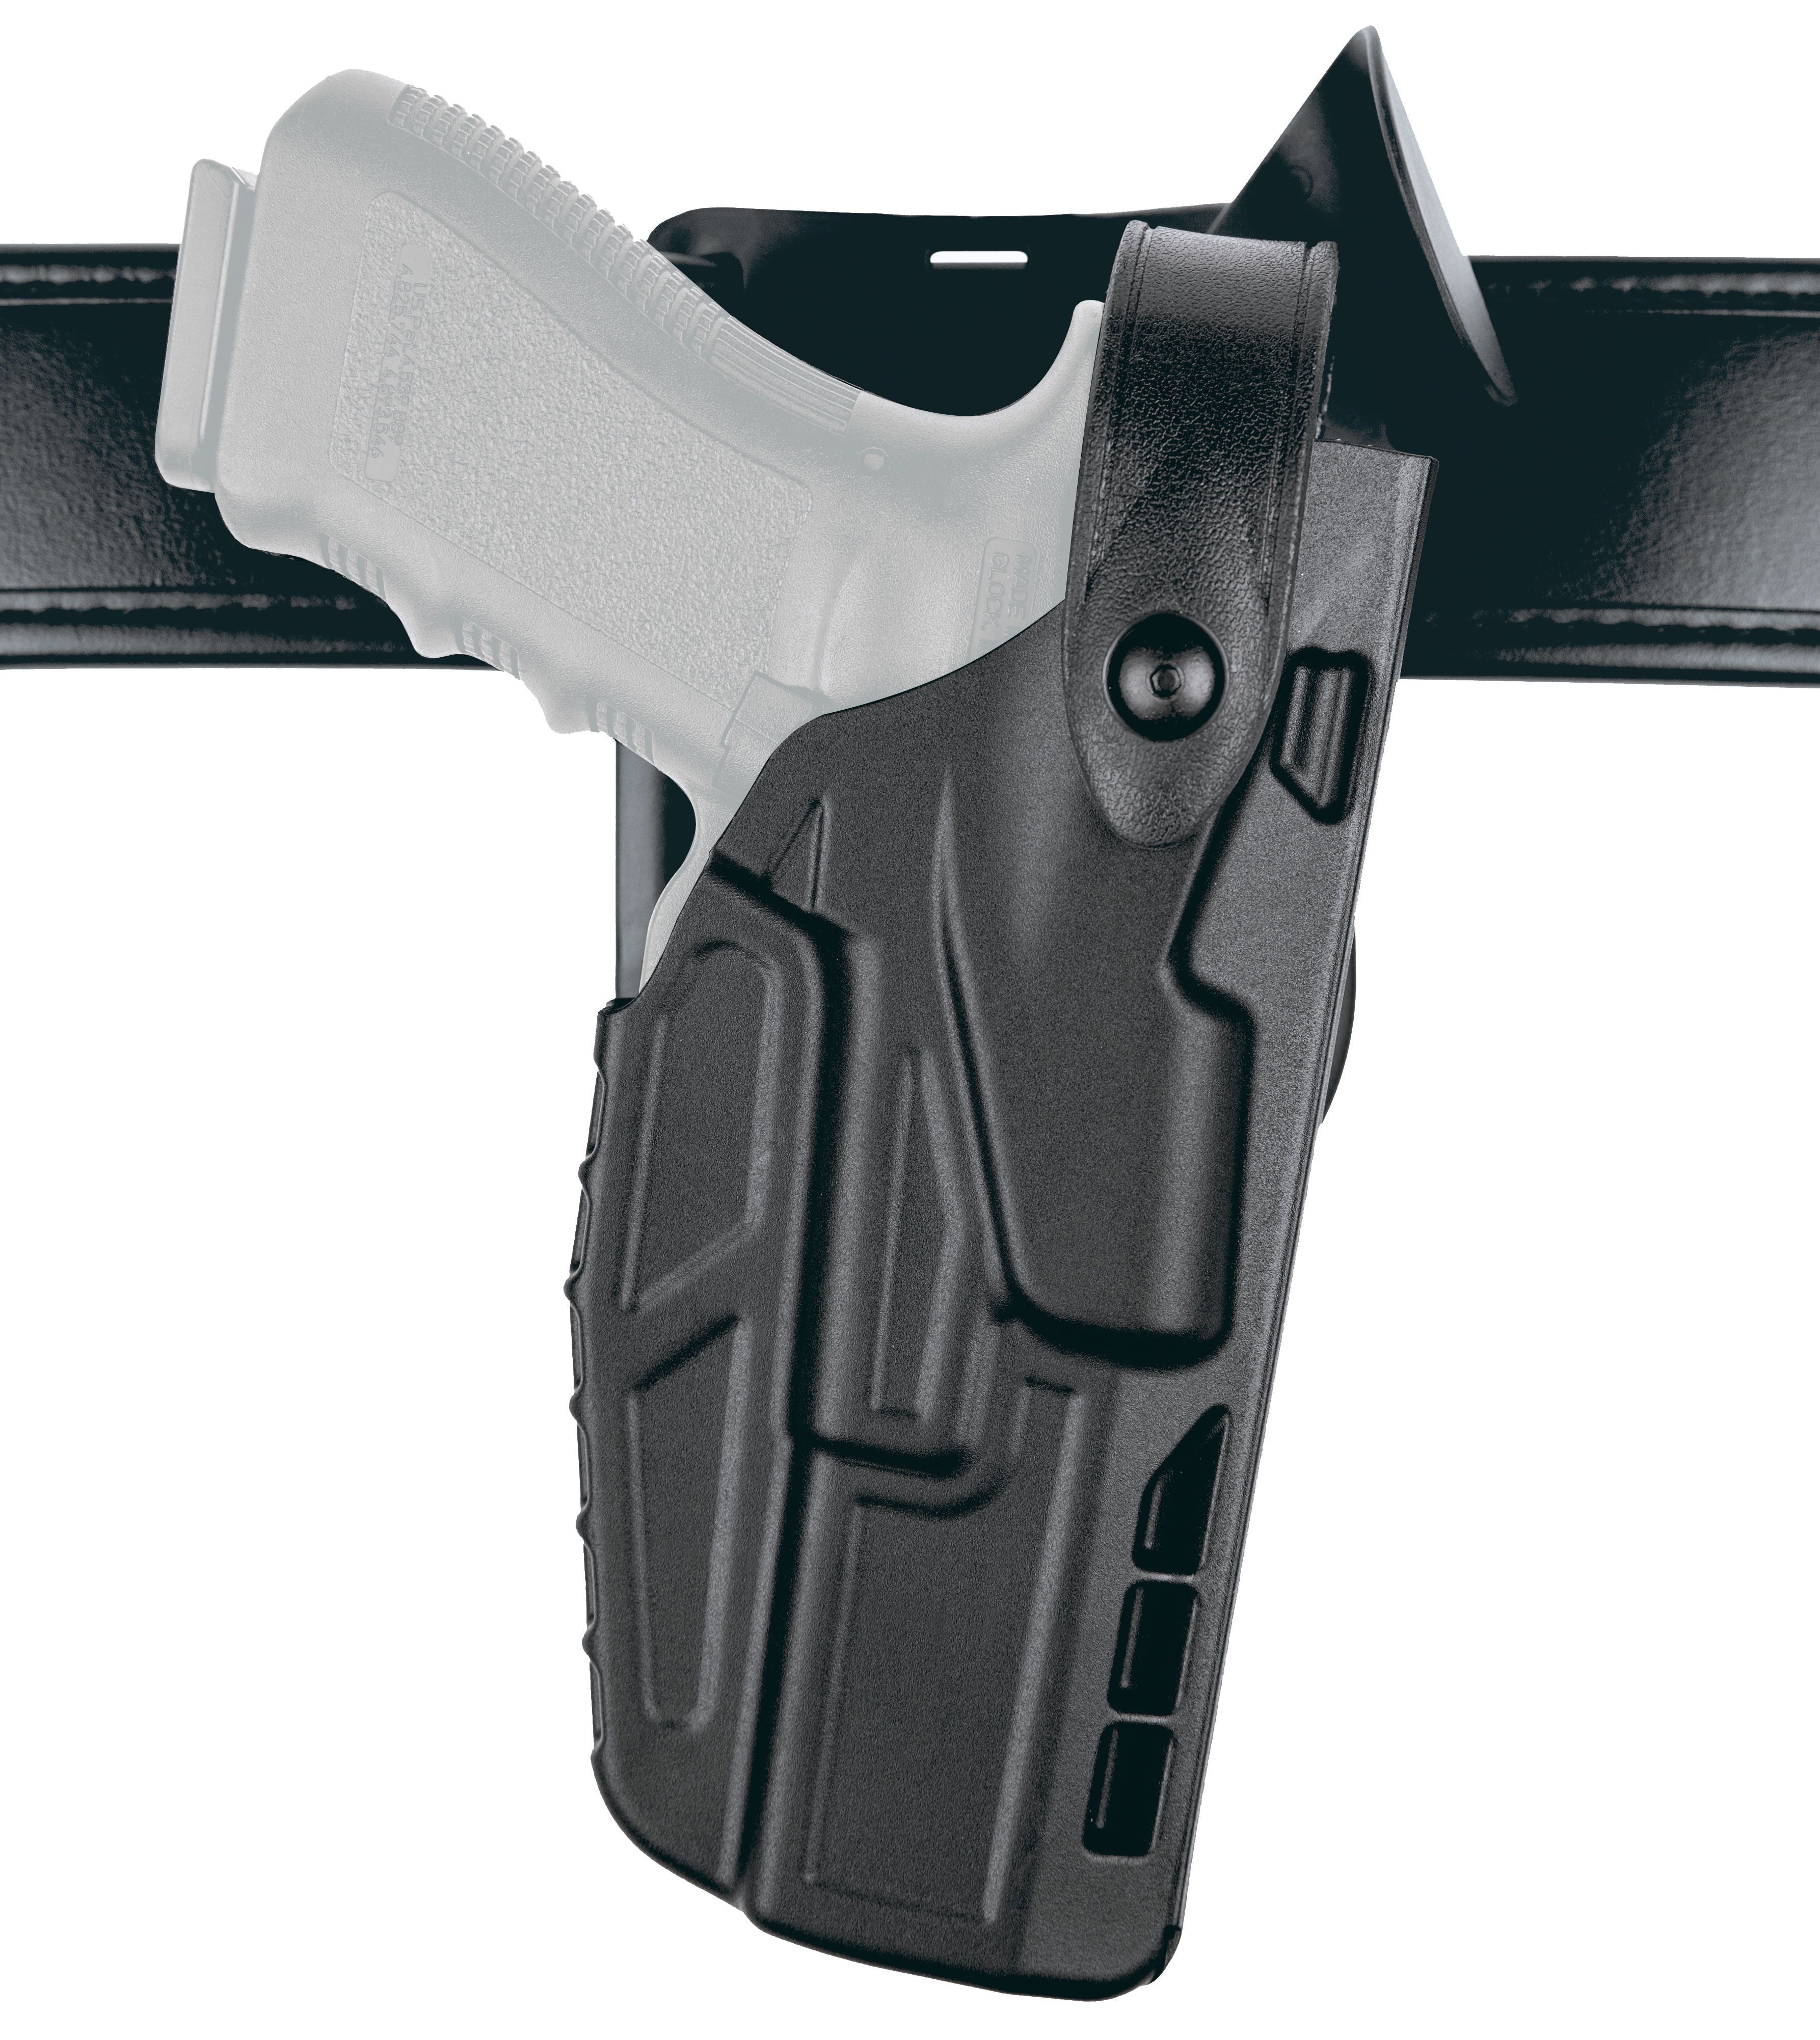 Safariland 7365 Low Ride Duty Holster - 7365-832-411: 7365-8325-411